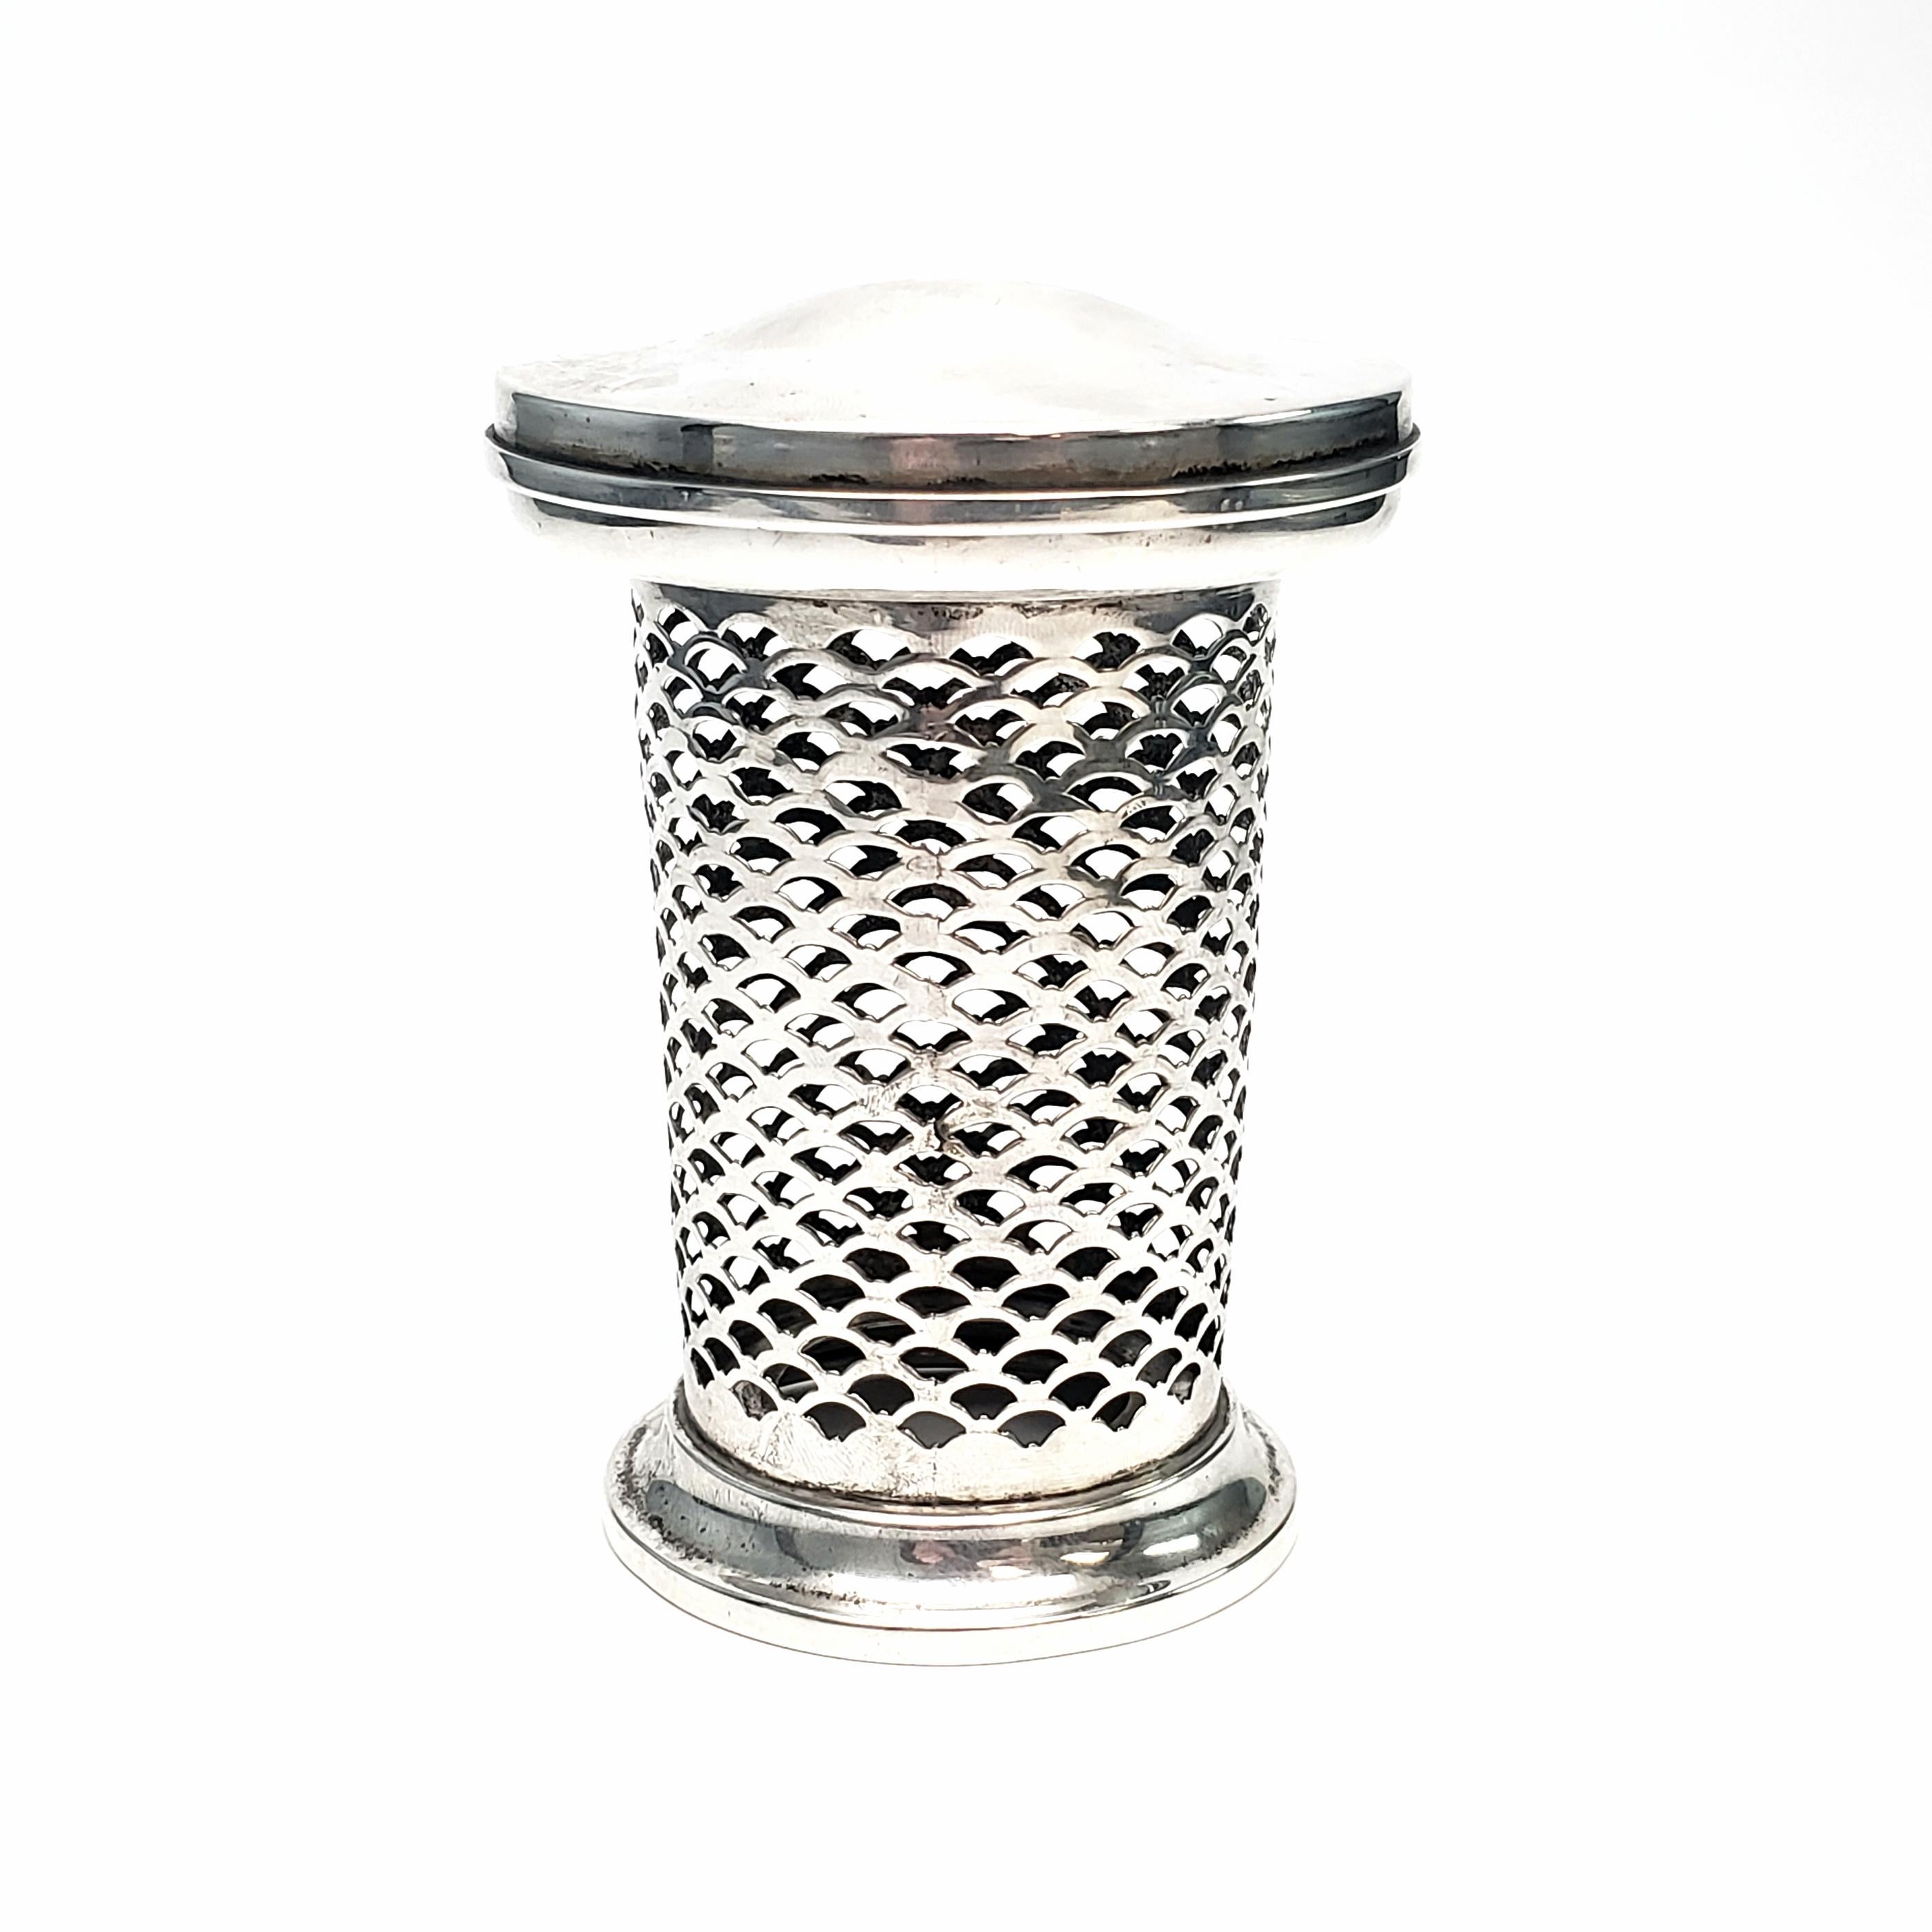 Vintage reticulated sterling silver jar by Meriden Brittania Co of Meriden, CT.

This jar could be a spice jar, a tea caddy or a piece of a vanity set. Features fish scale pierced sterling silver jar and slightly domed lid. Missing glass insert.